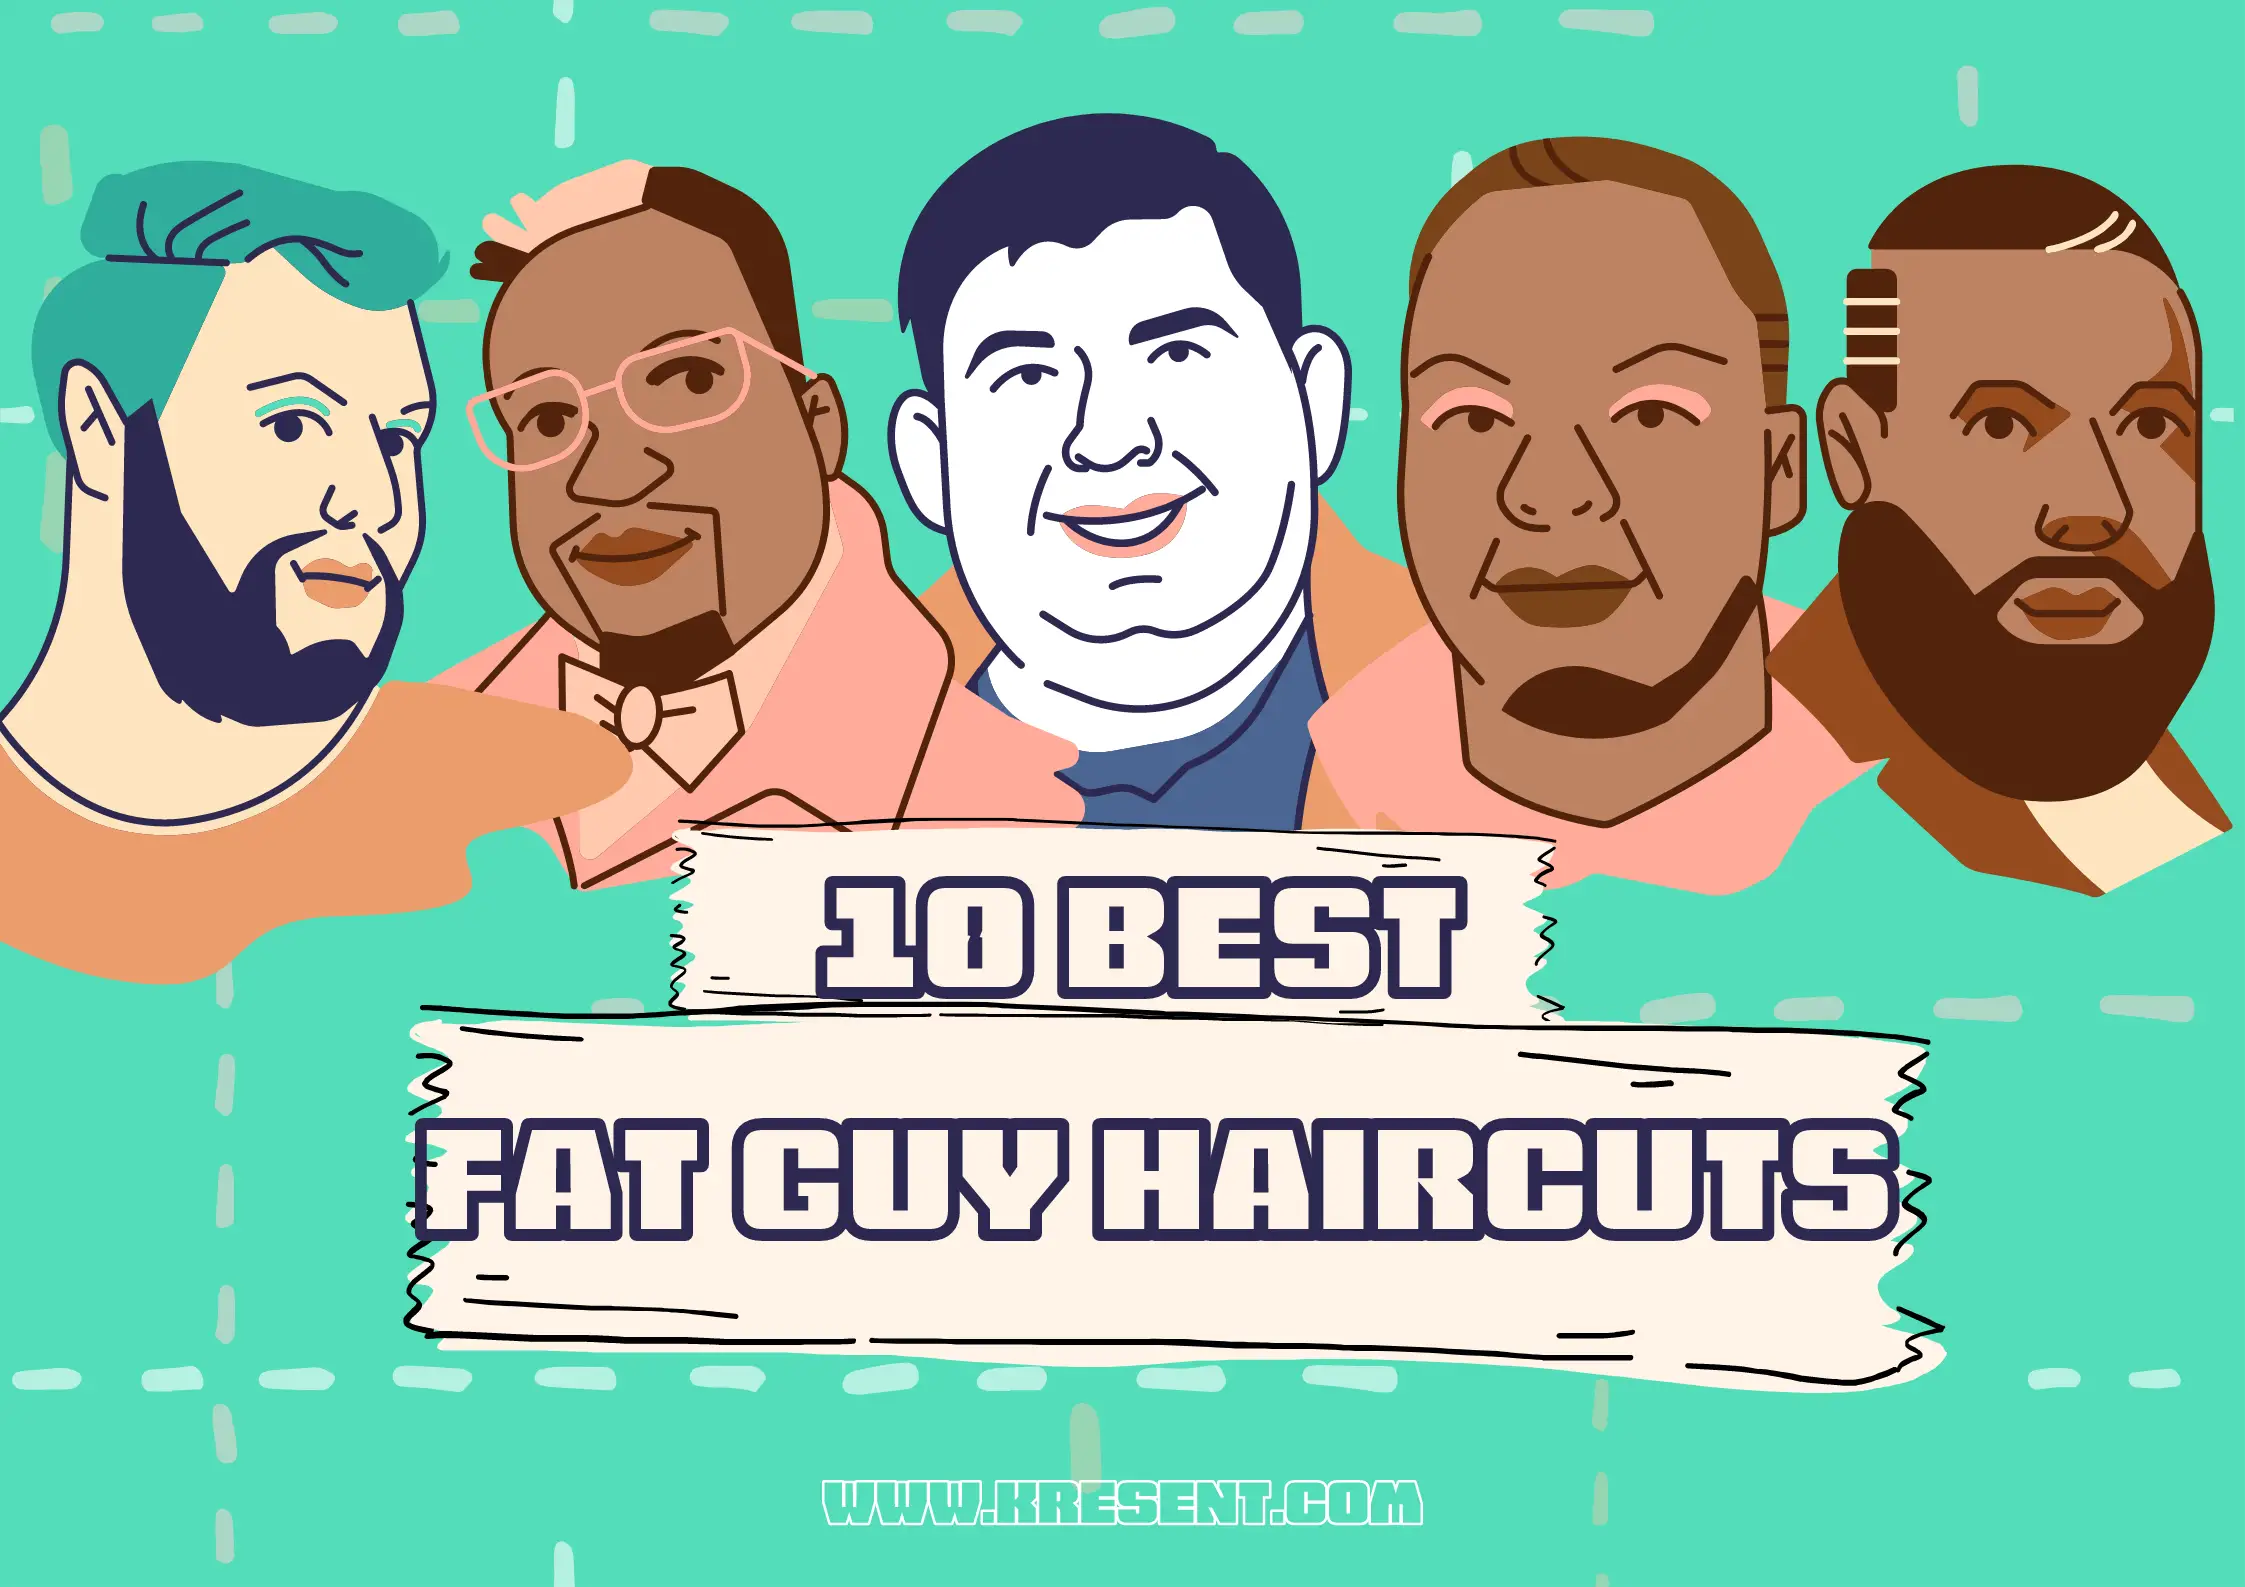 10 Best Fat Guy Haircuts - Slimming haircuts for chubby faces male (Big guy  haircut) – Kresent!